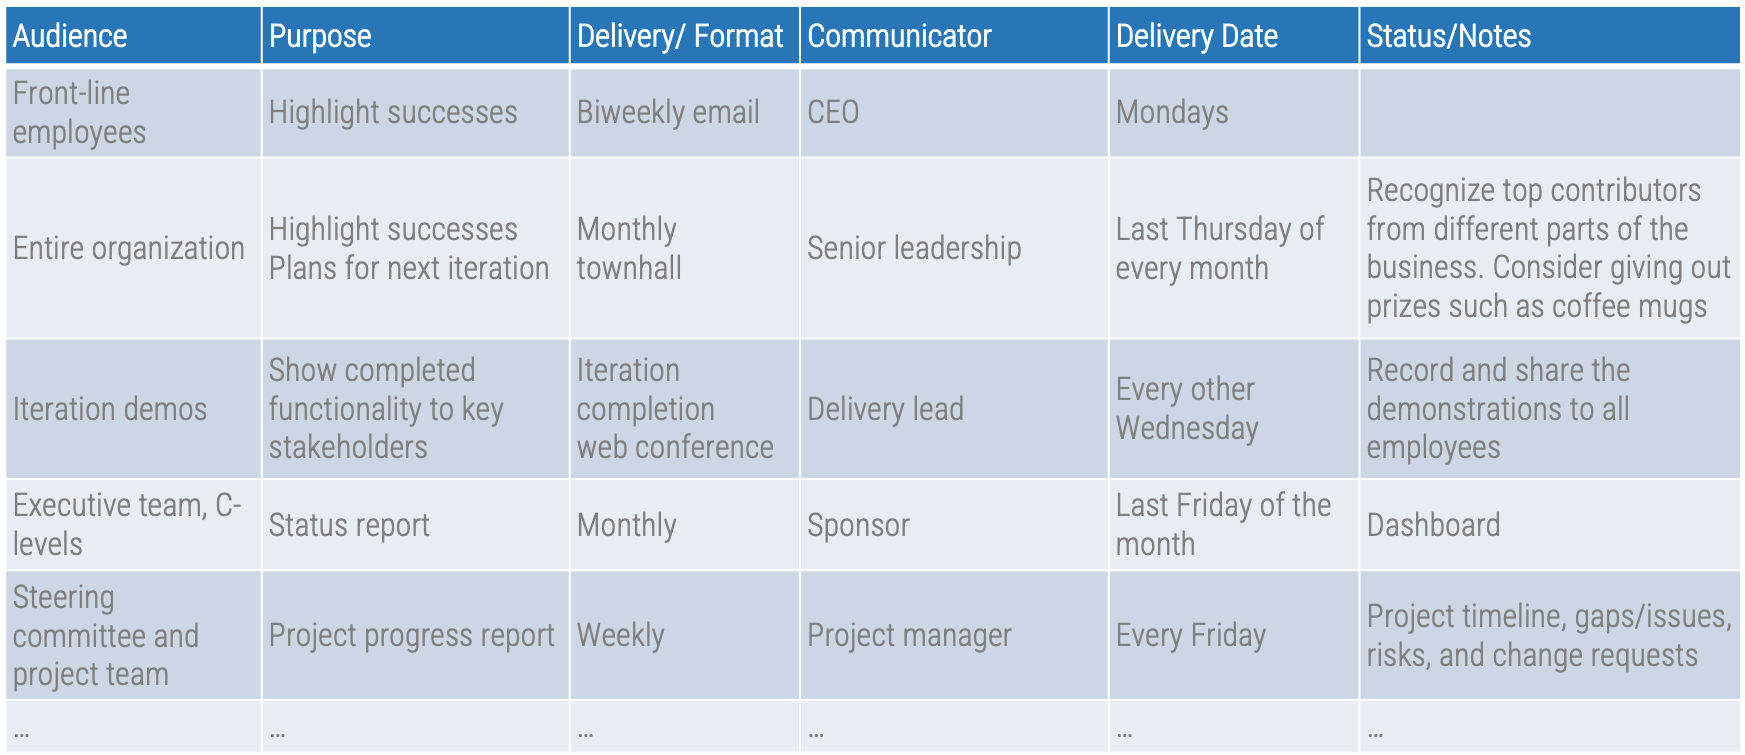 Example table of project progress communication. Audience, purpose, delivery/format, communicator, delivery date, and status/notes.